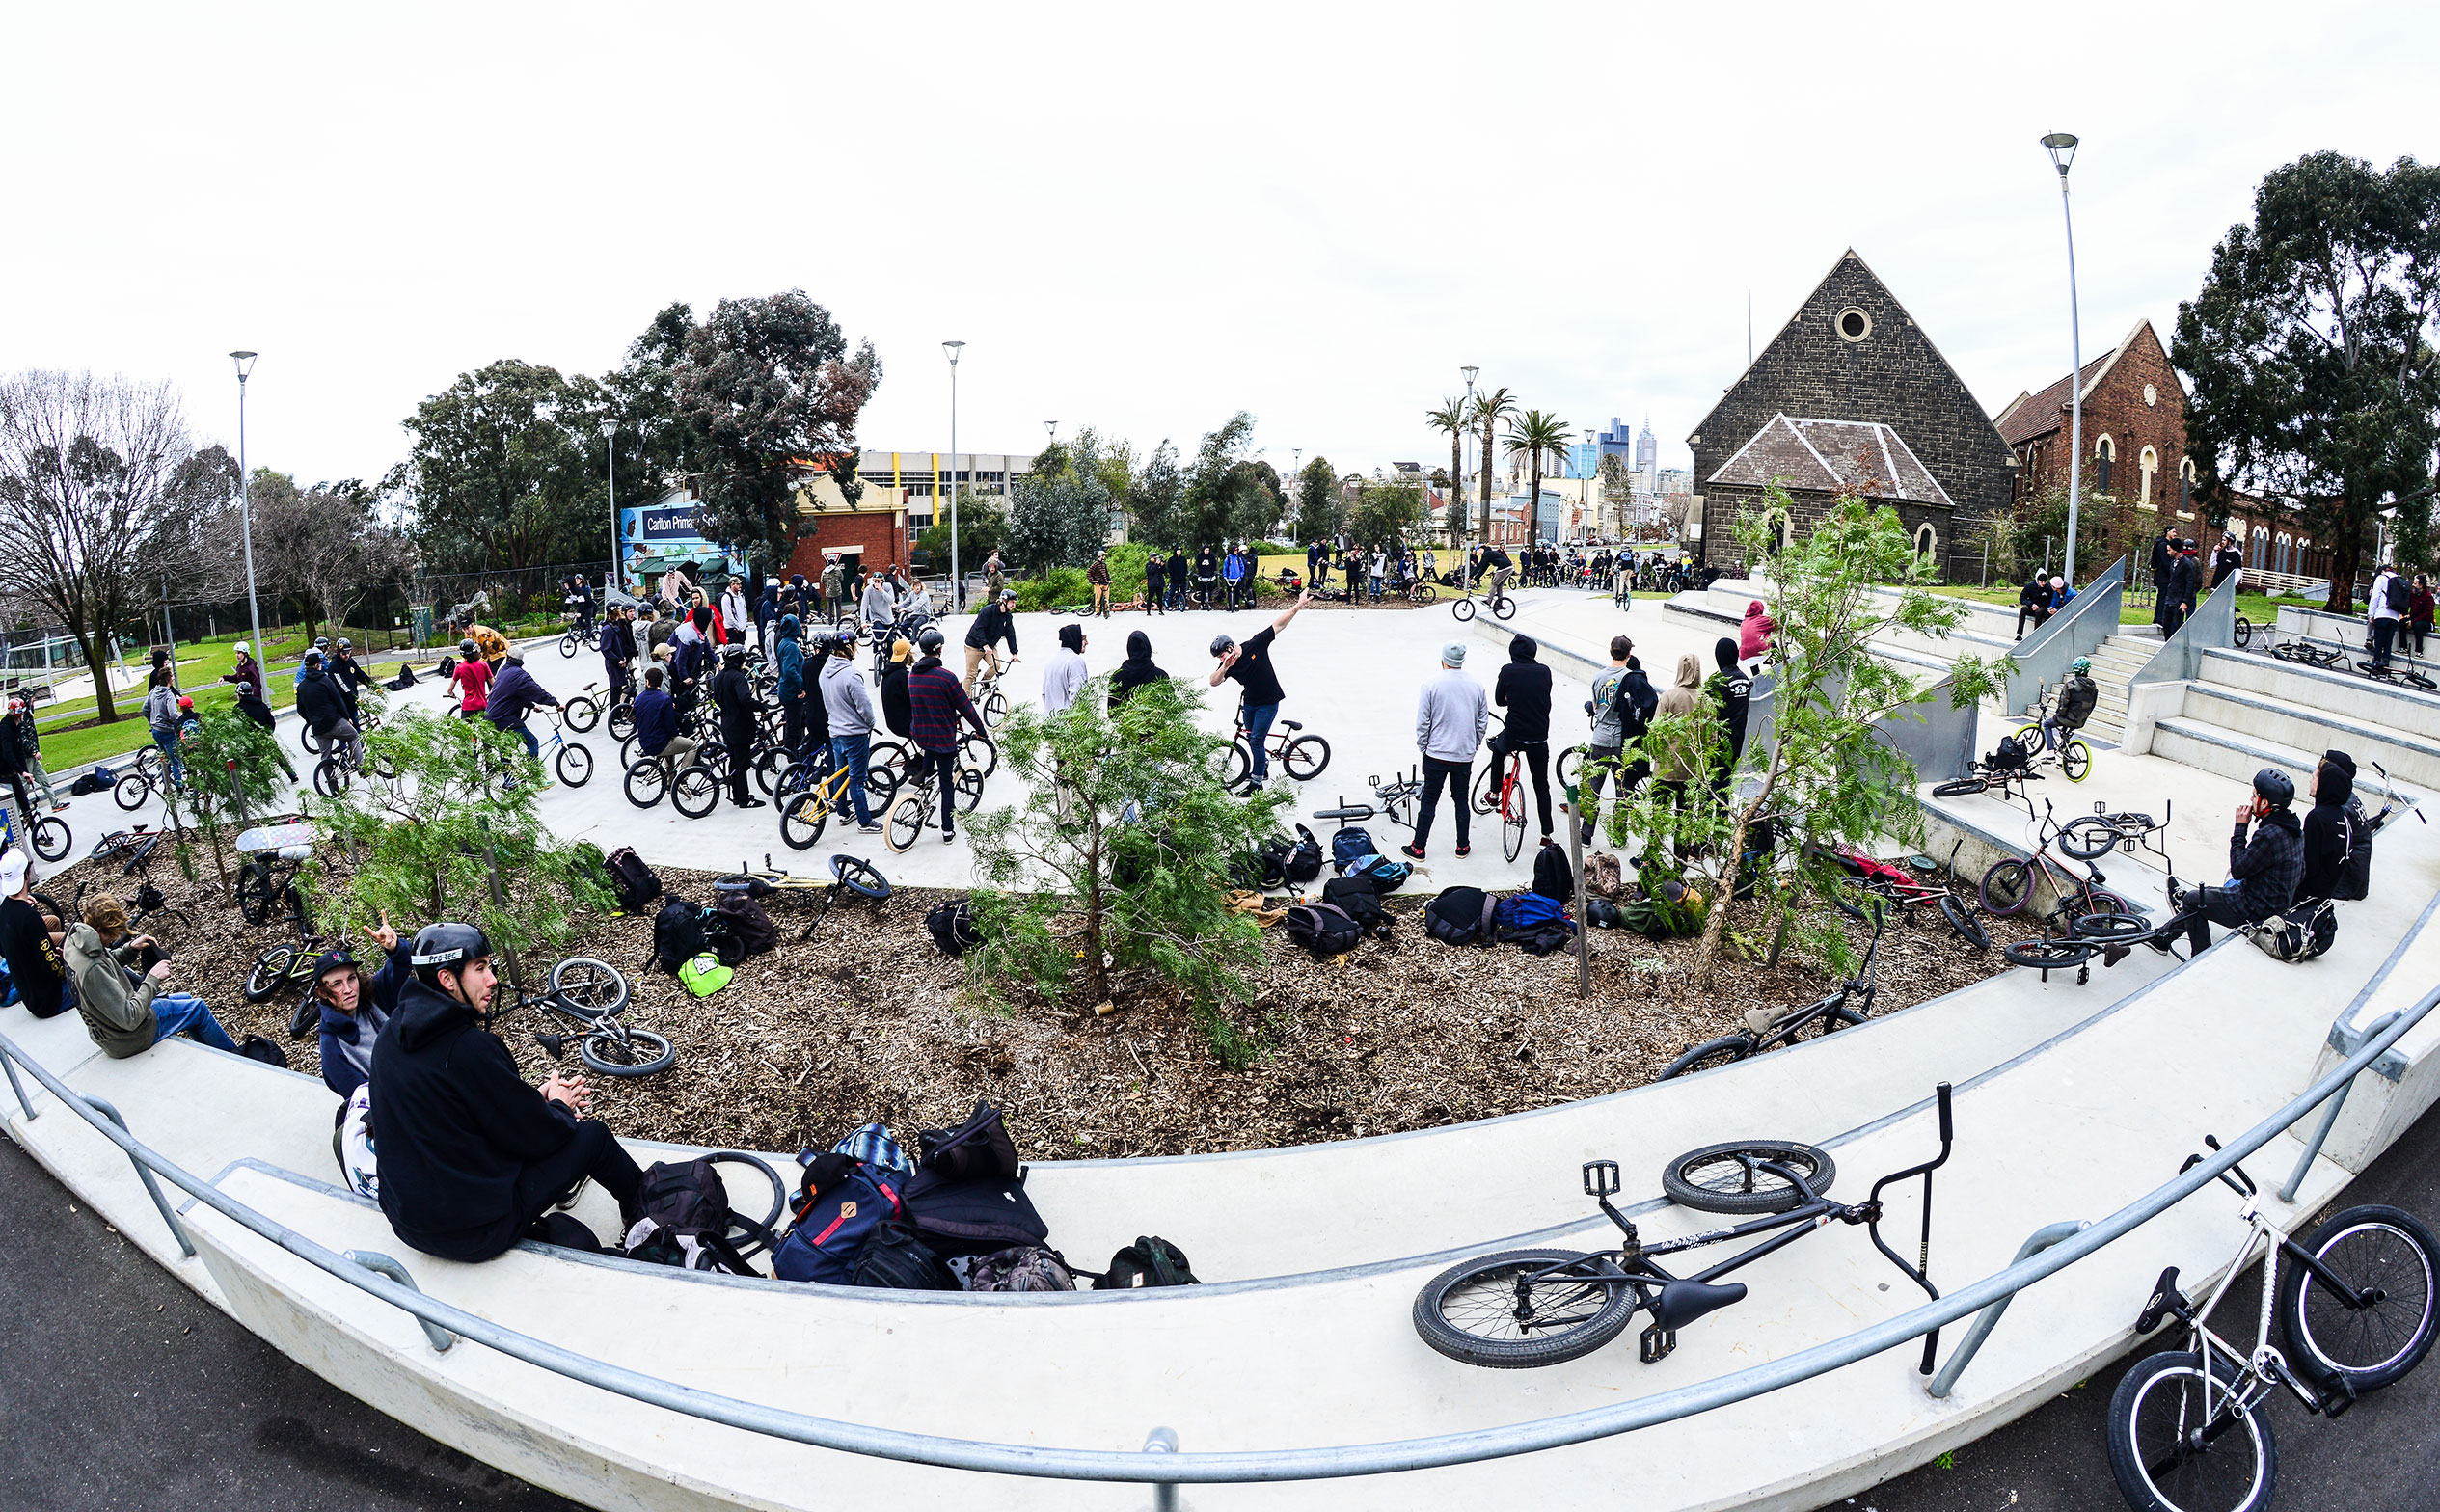 The meet spot was stacked with riders getting in a session every which way you turned.